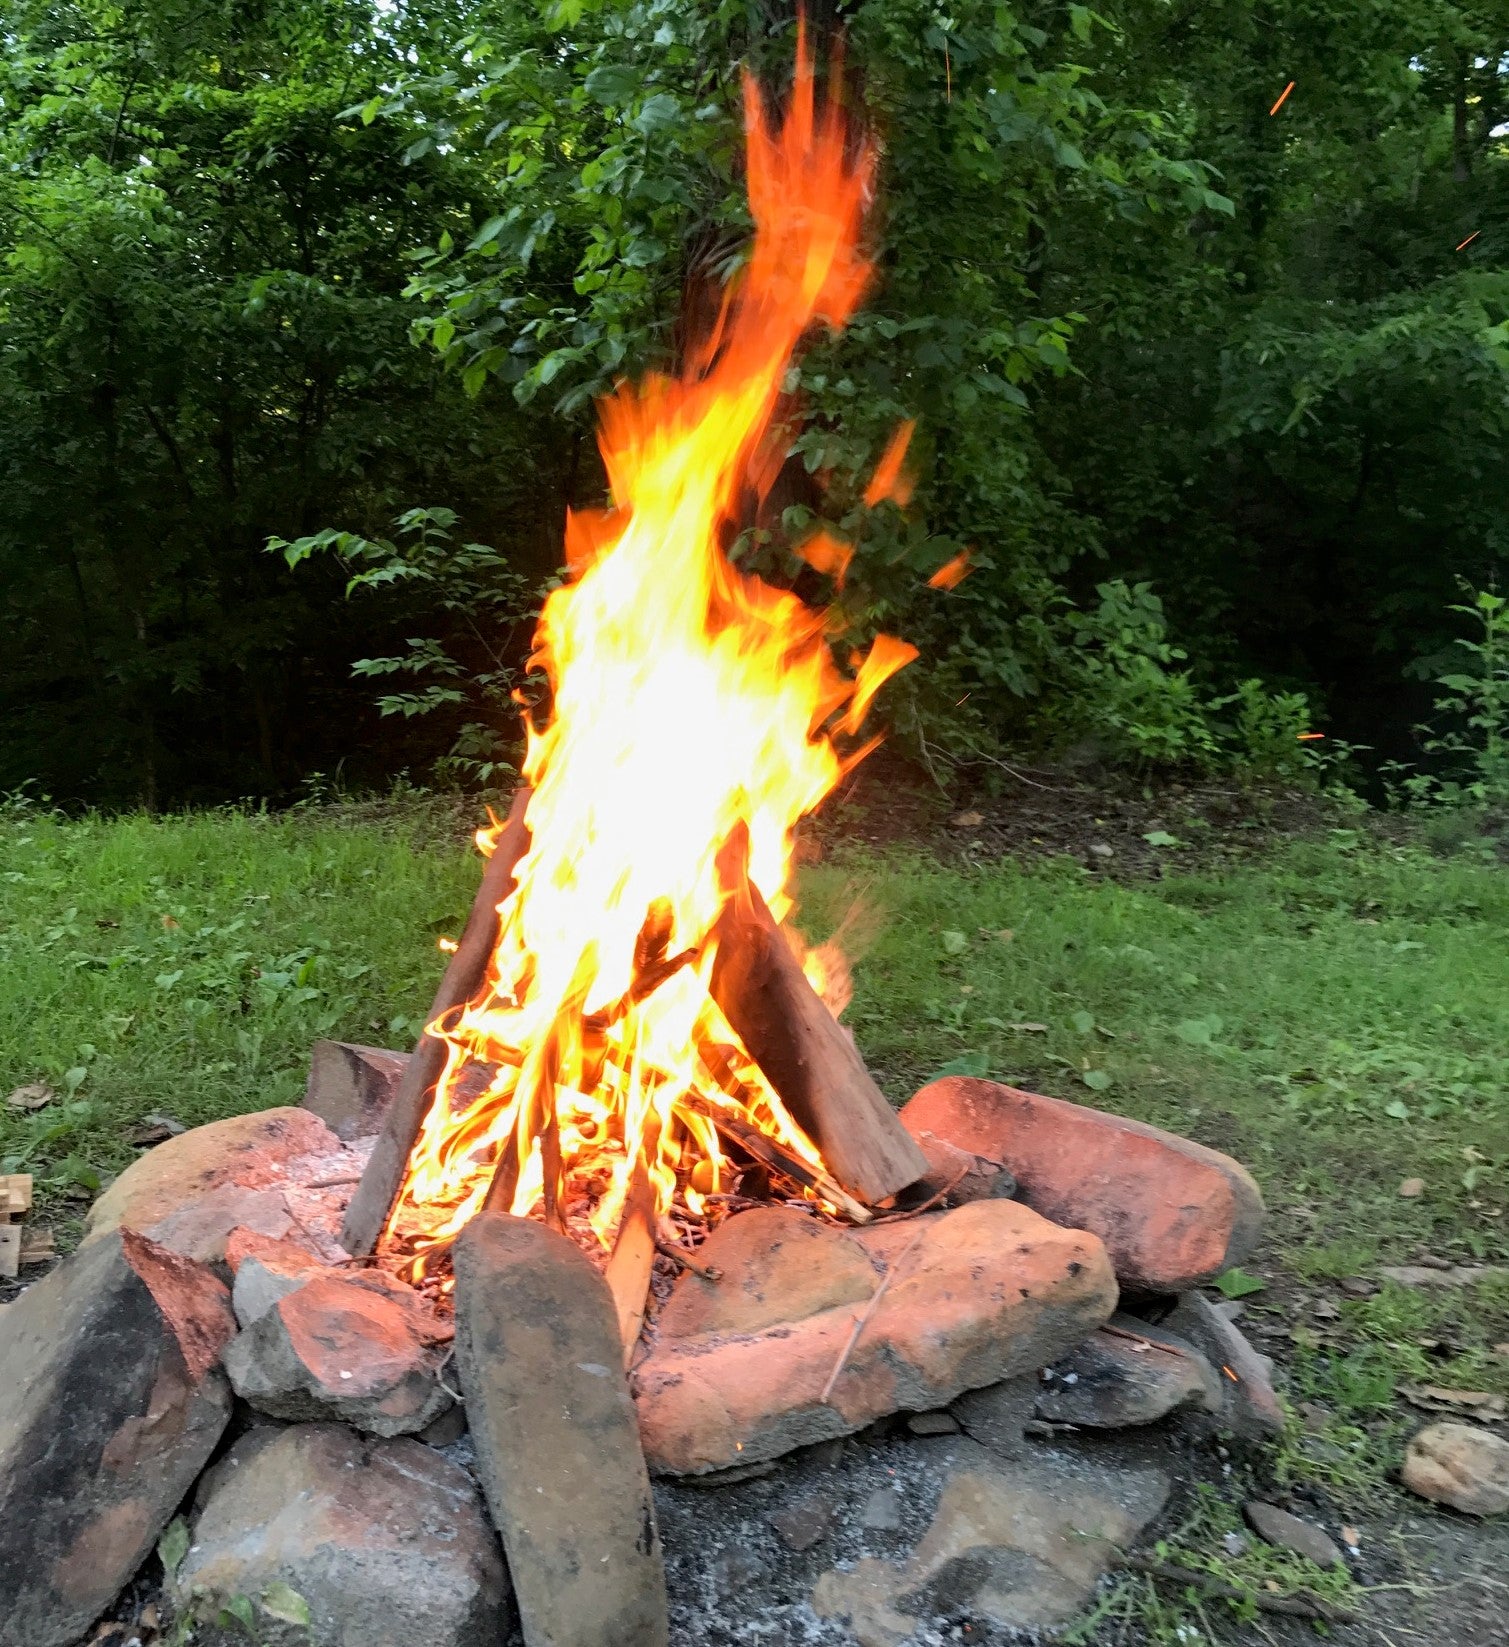 One dry night for a fire.